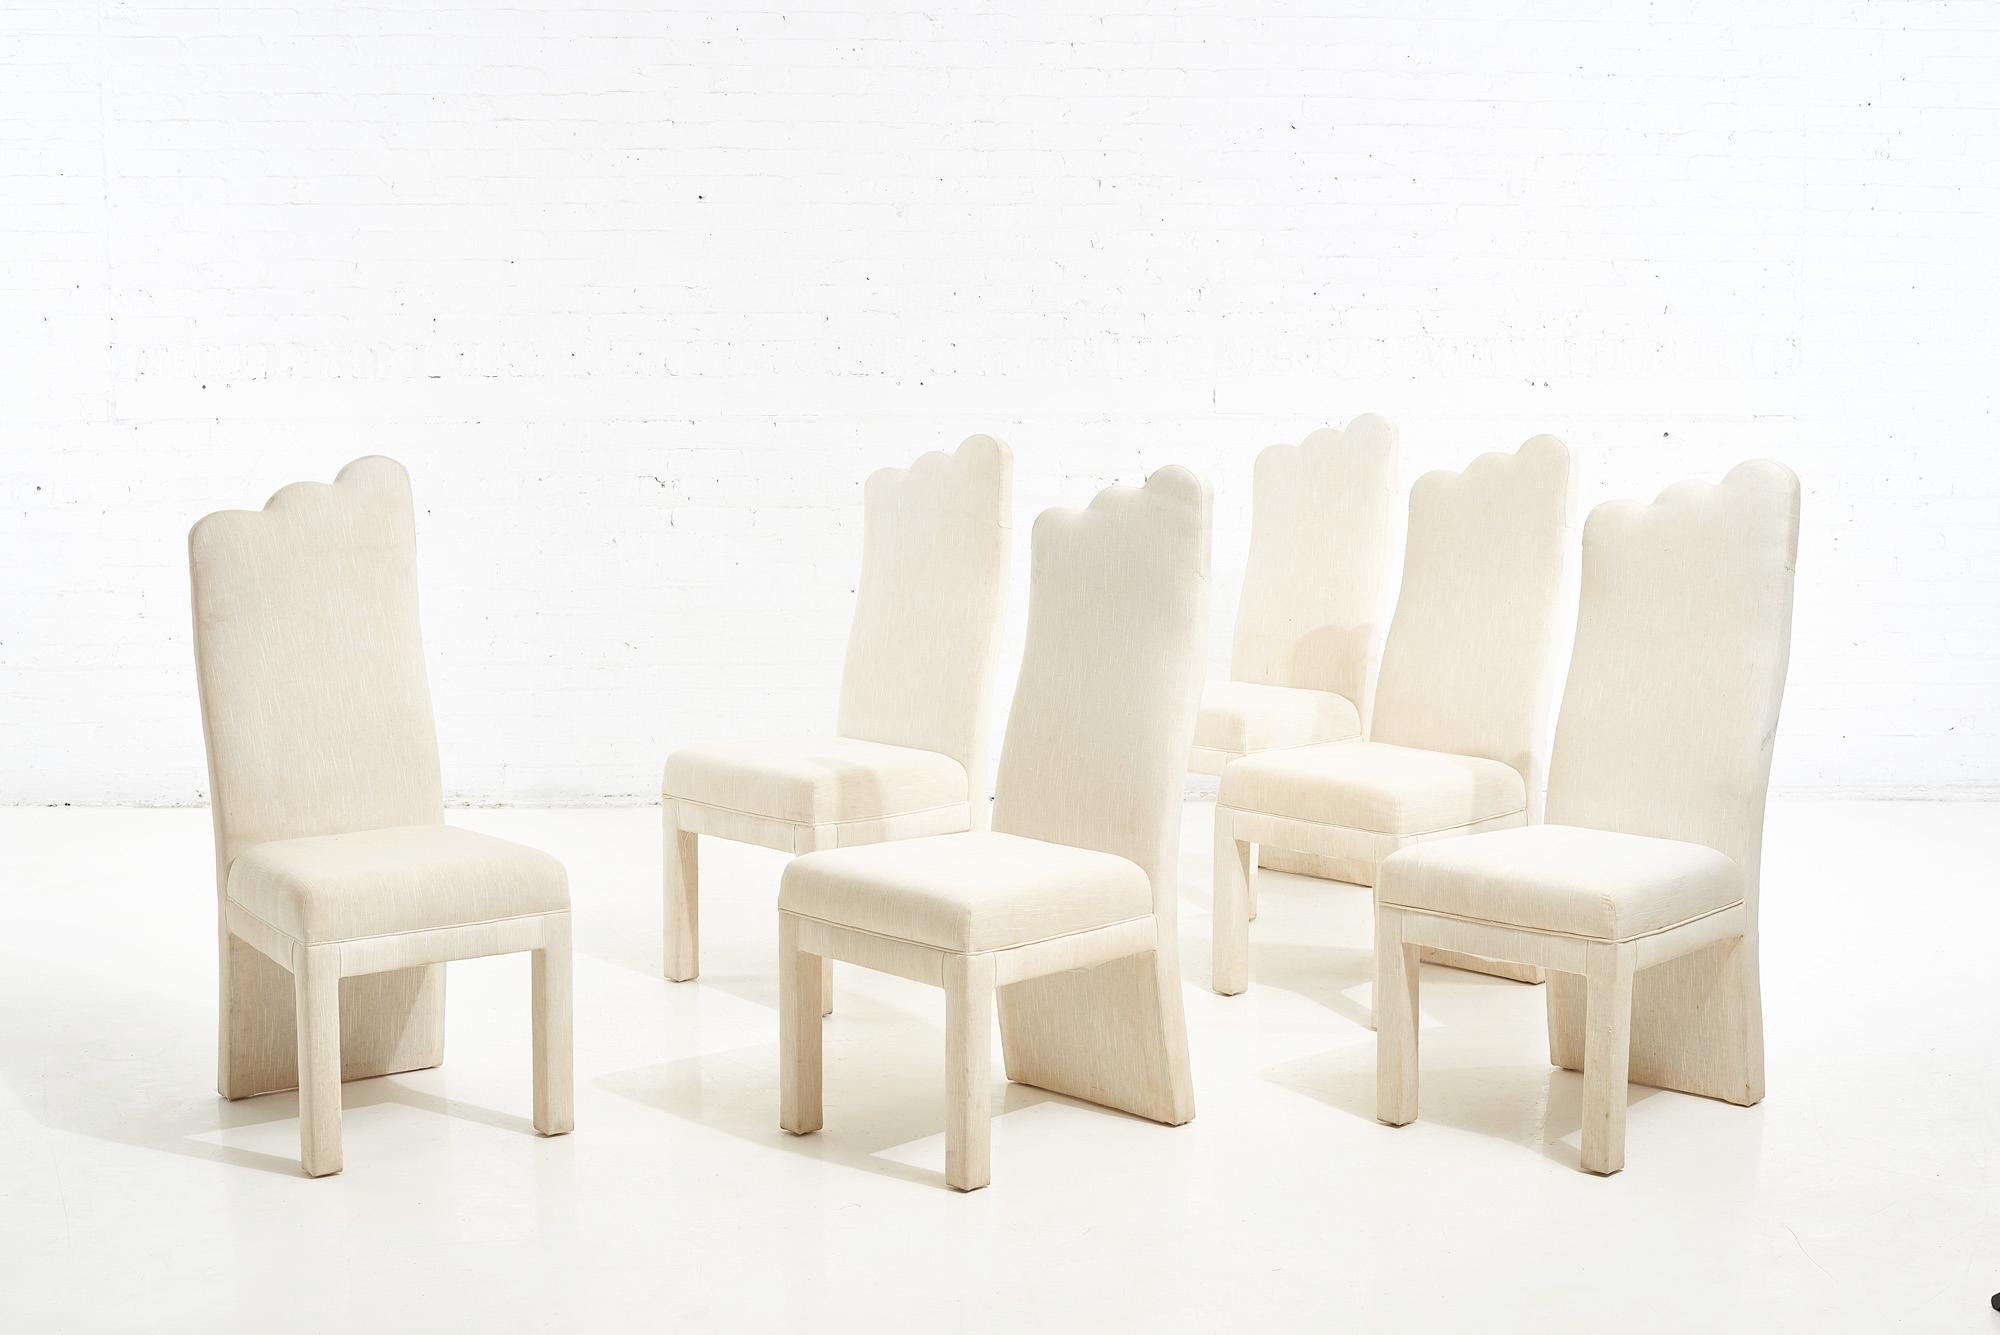 Postmodern Parsons dining chairs. Set of 6 with original upholstery, some stains.